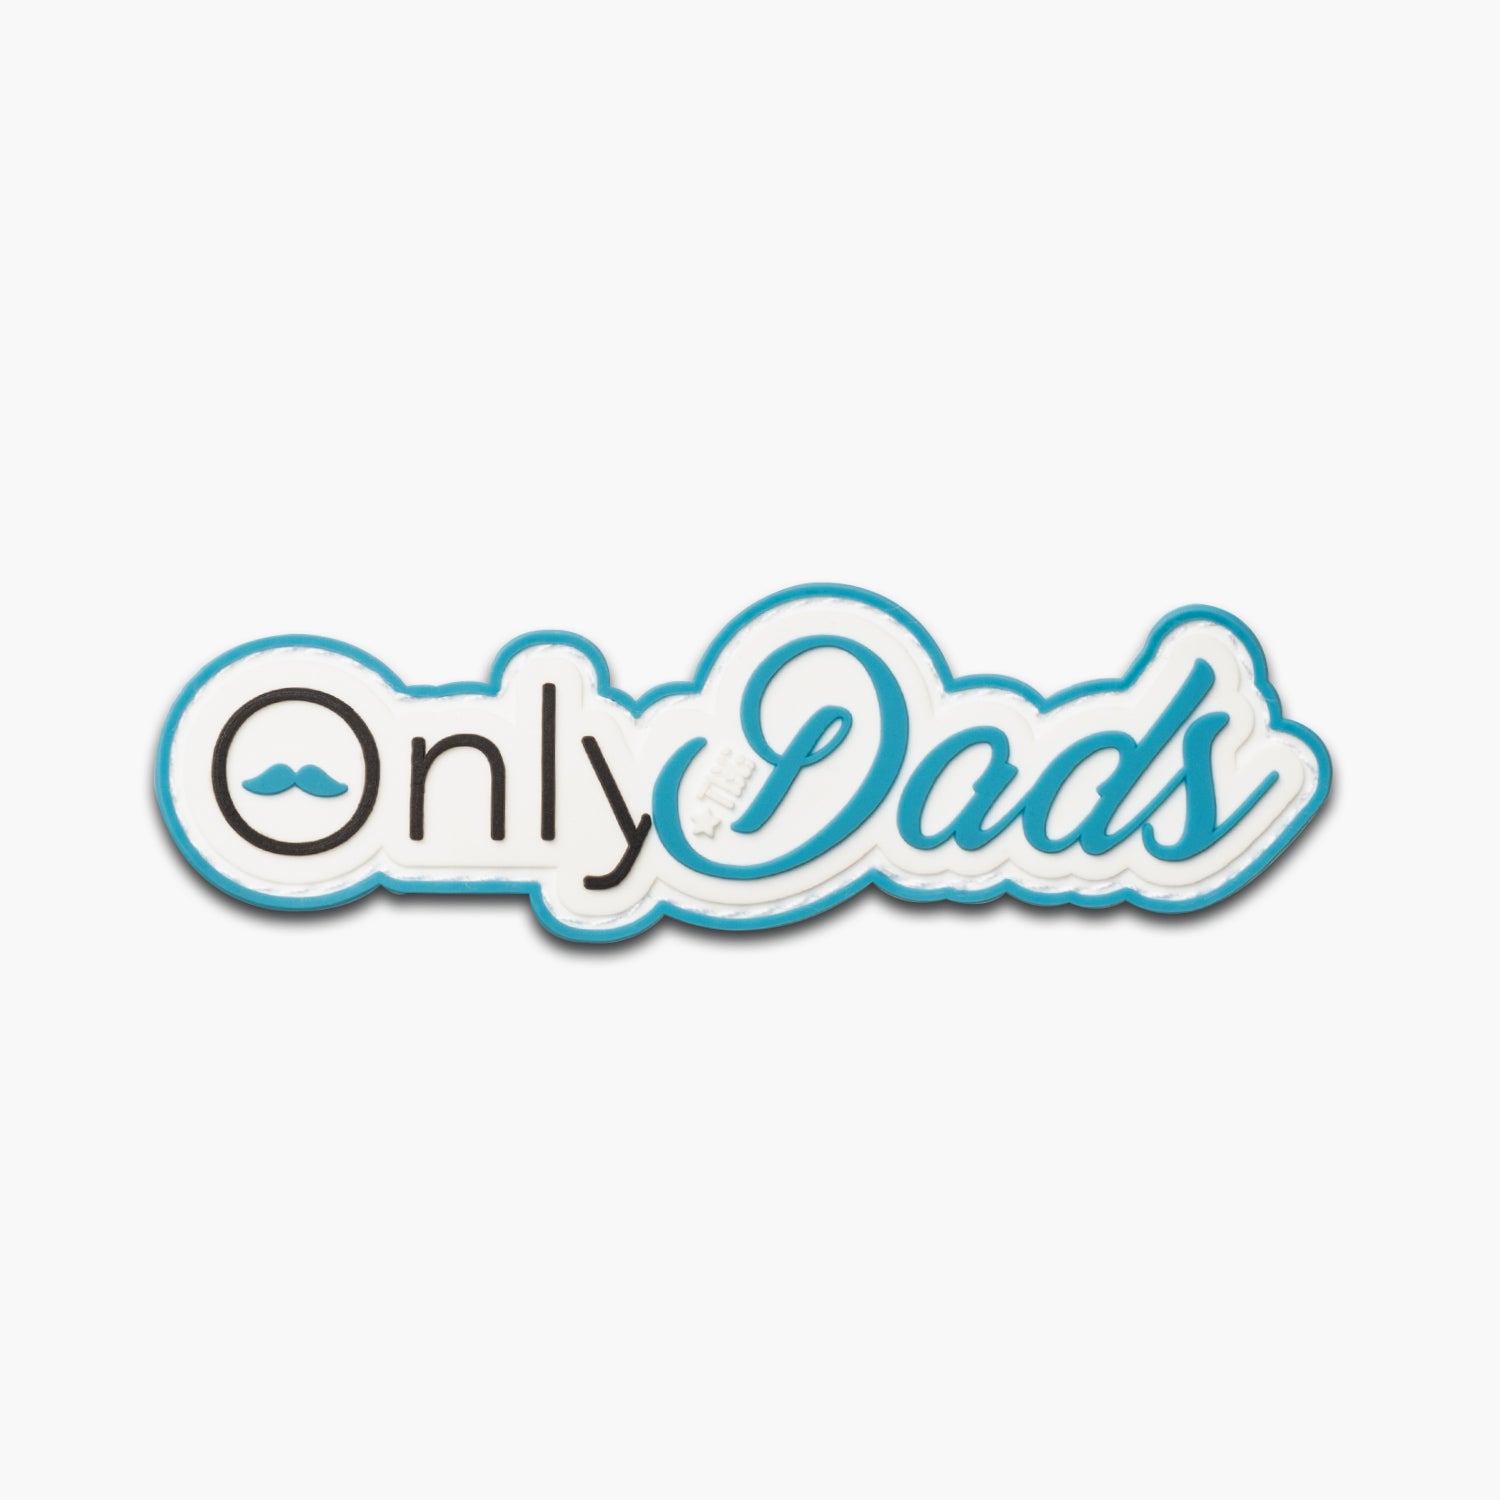 Only Dads Patch